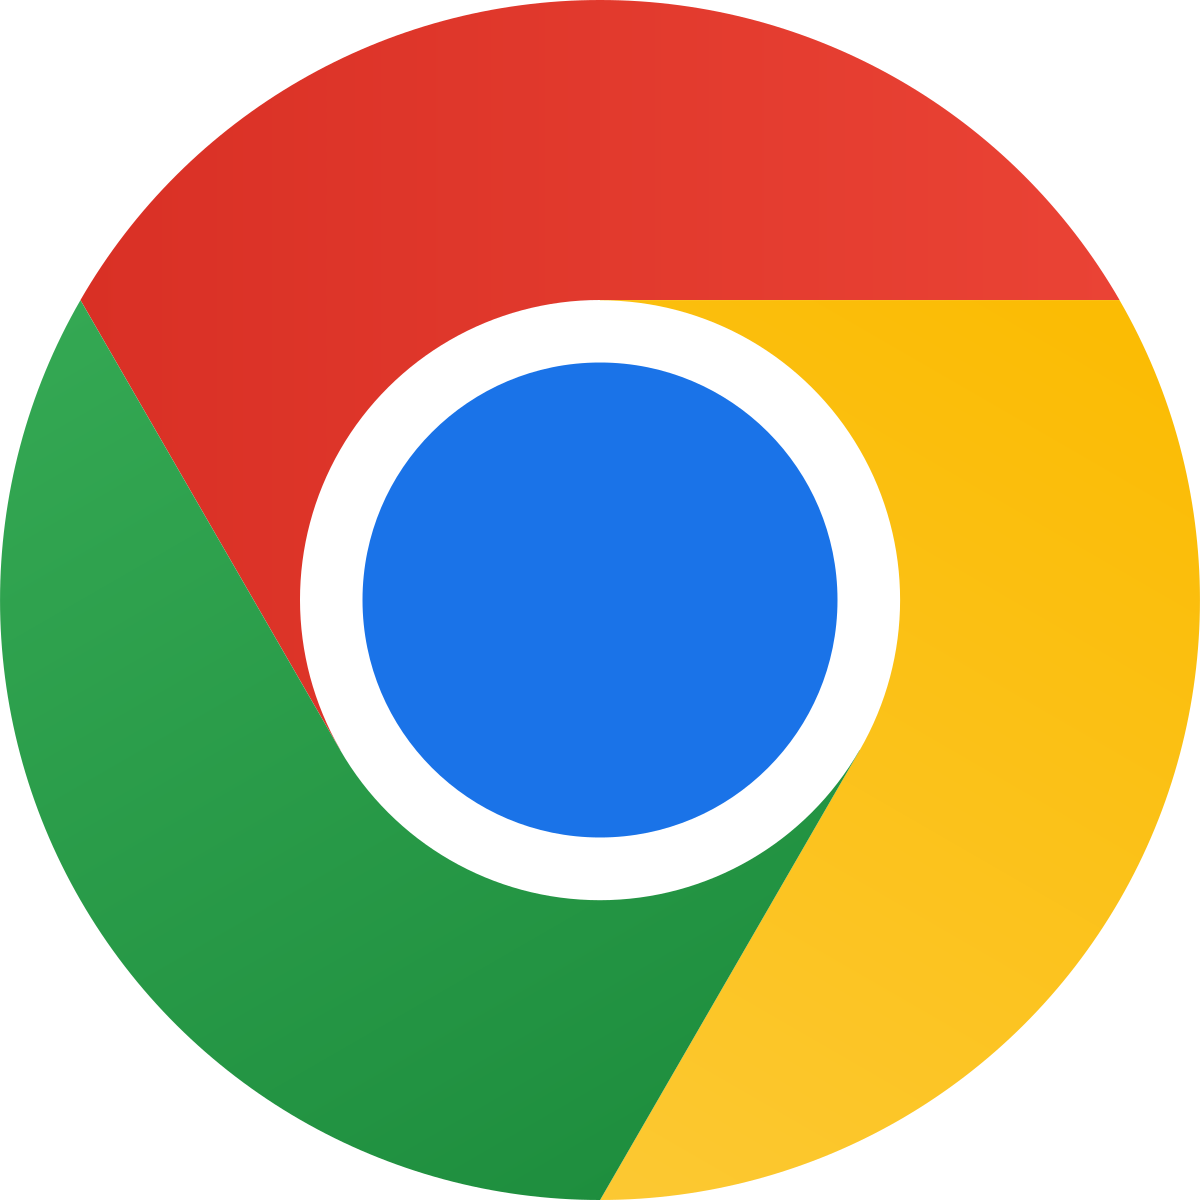 Is Google Chrome free and open-source?